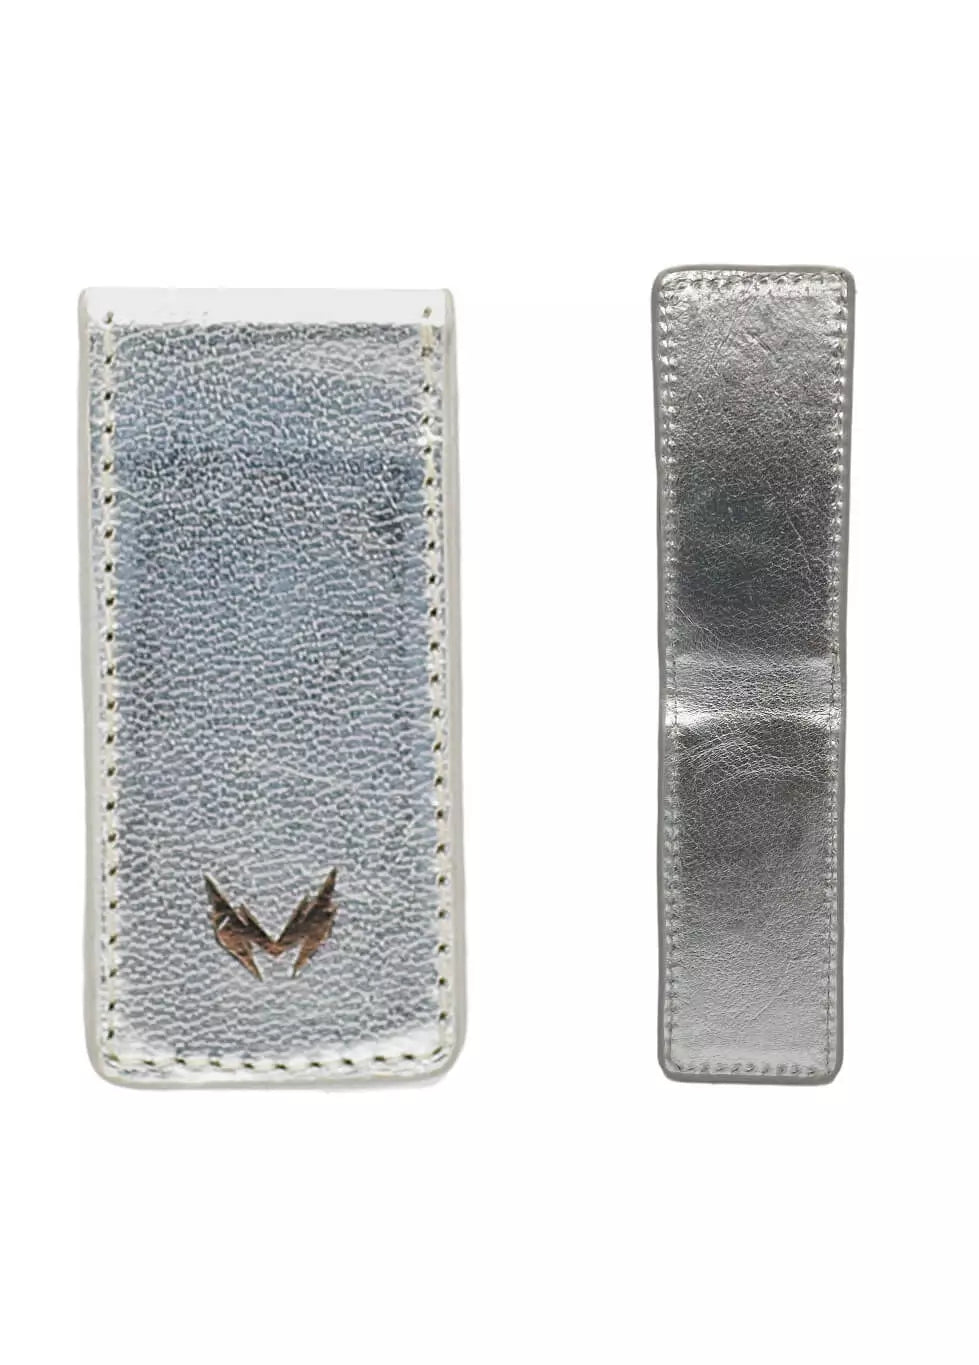 Moon Mist mens wallet with money clip